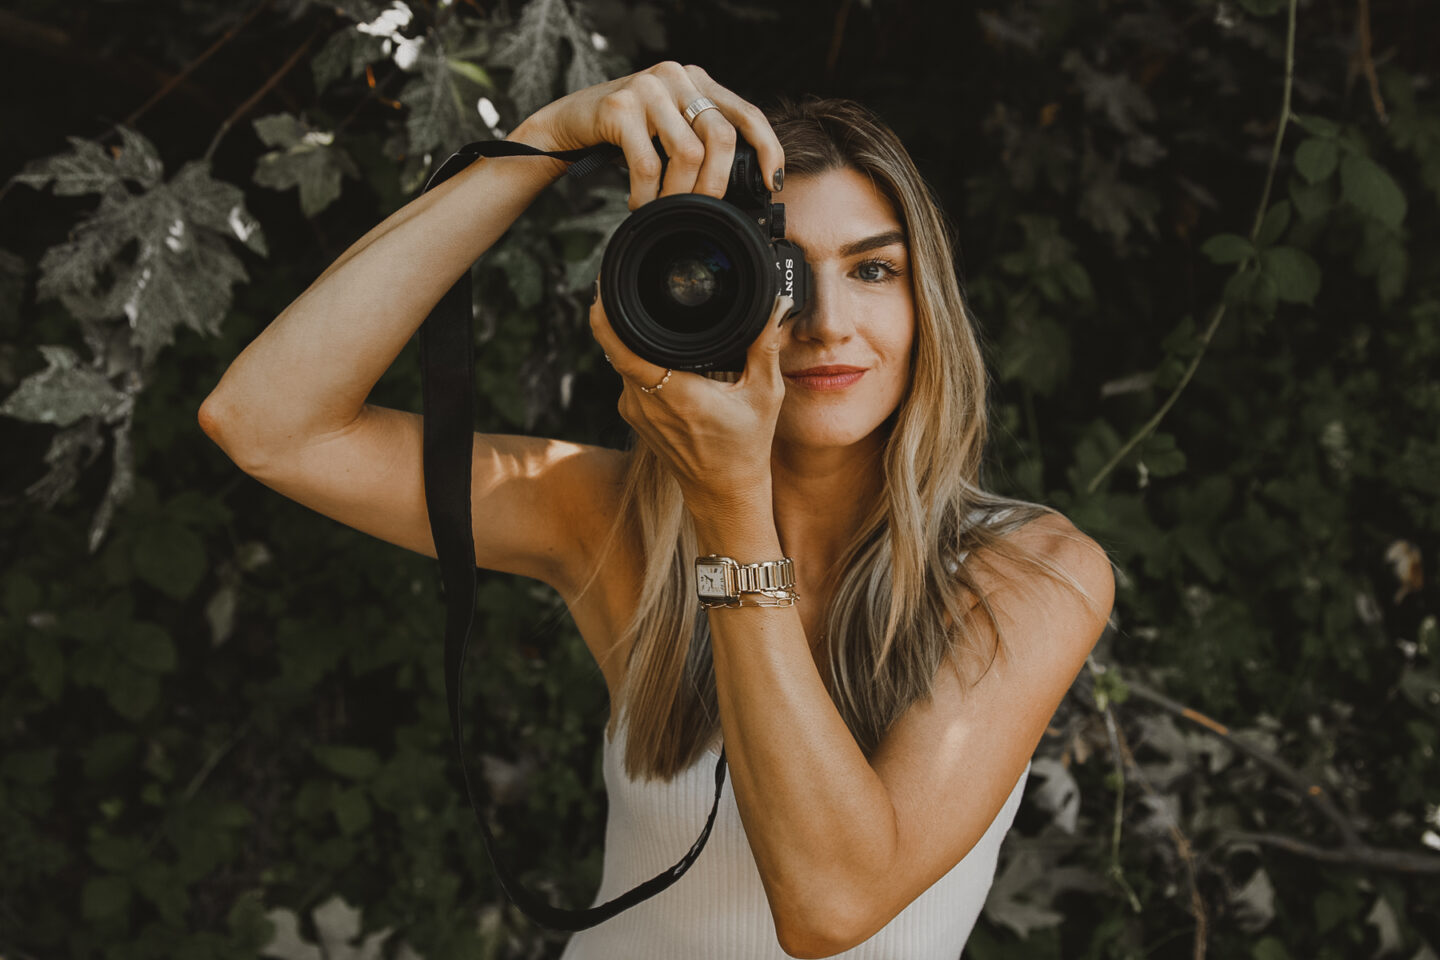 The Grey Edit Photo - Cortney Bigelow - Seattle Lifestyle Photographer-Fall Mini Sessions-Now Booking 2020